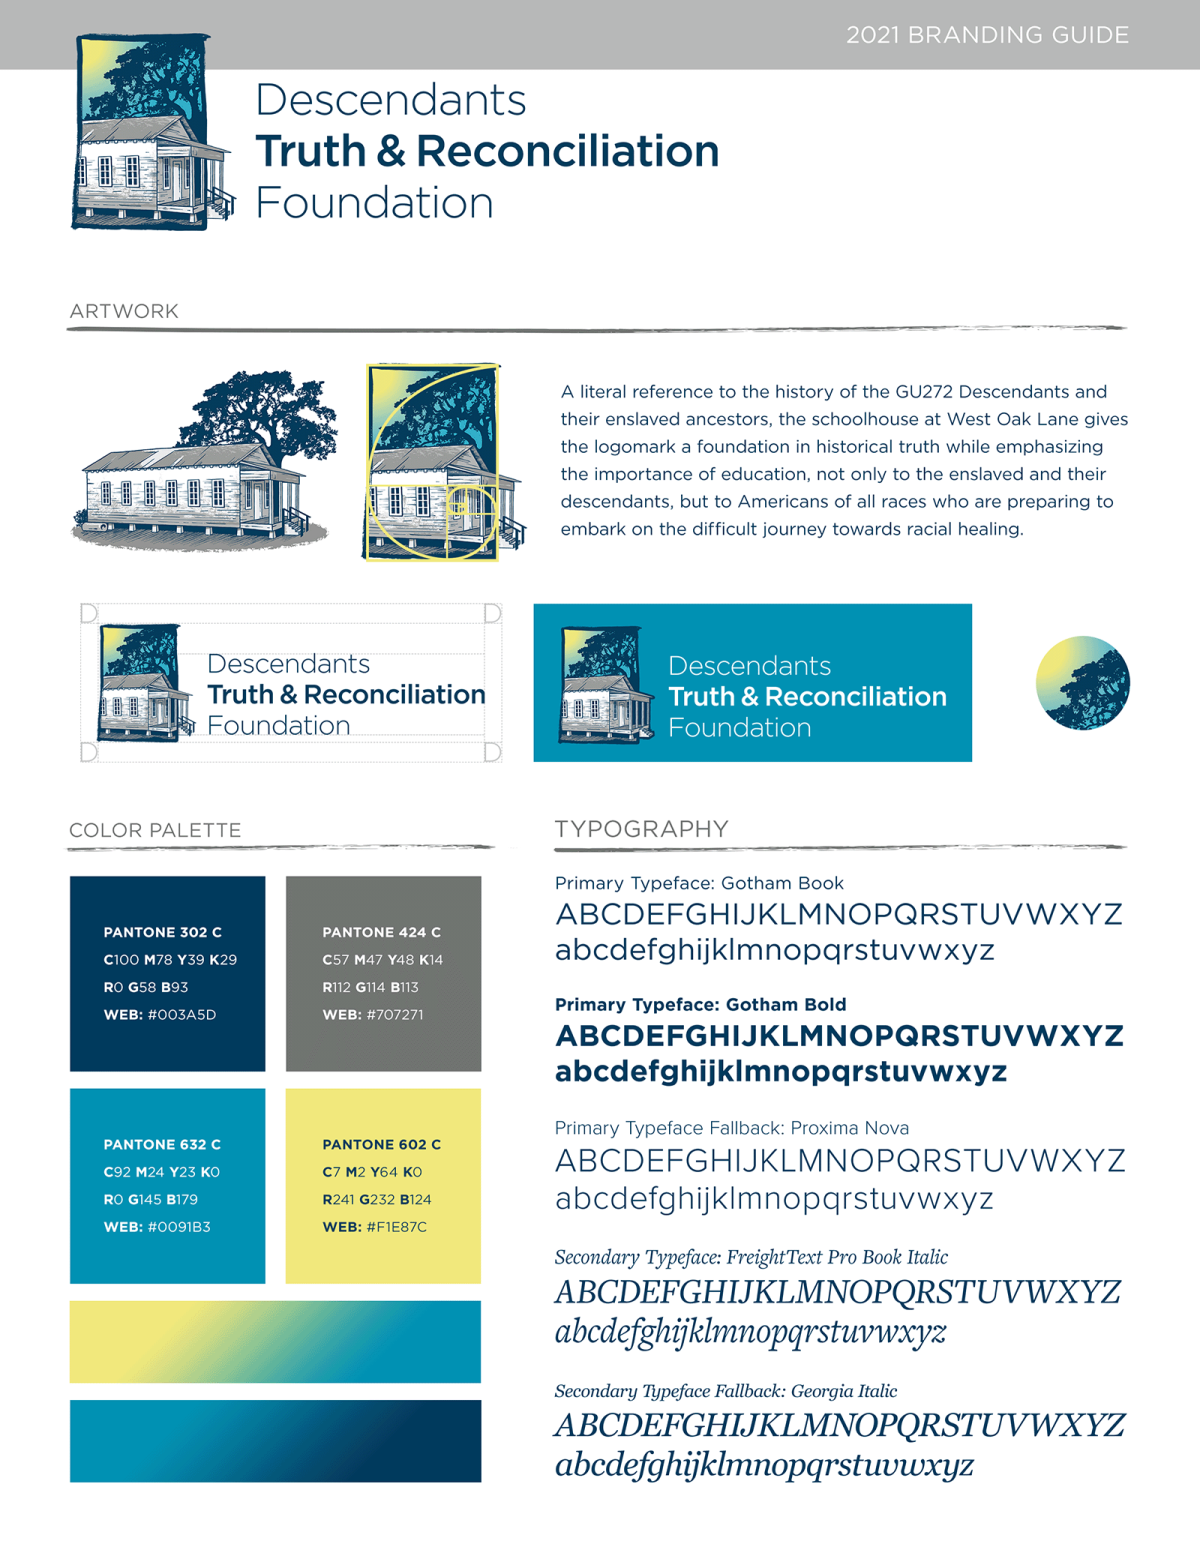 Descendants Truth and Reconciliation 2021 Brand Guidelines